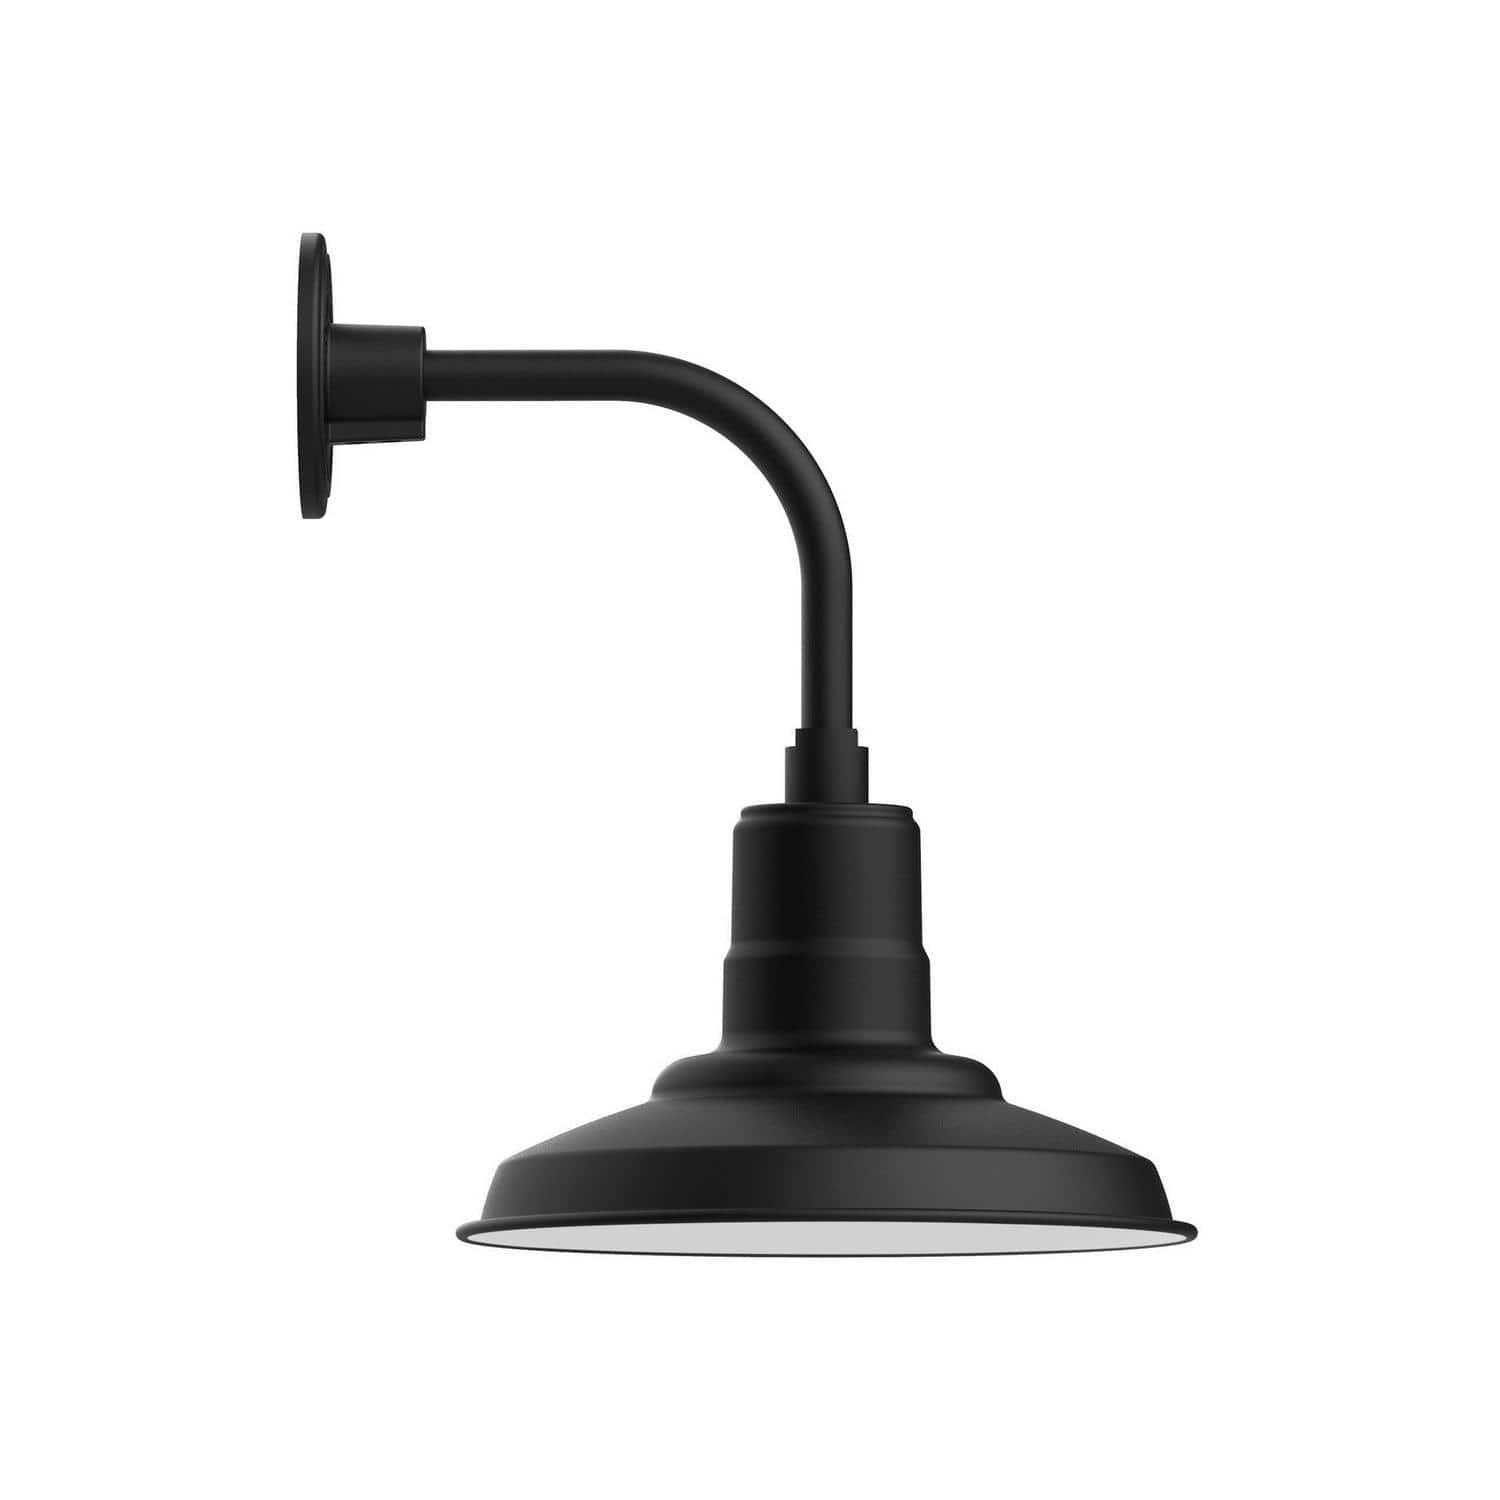 Montclair Light Works - Warehouse 12" Curved Arm Wall Light - GNT182-41 | Montreal Lighting & Hardware